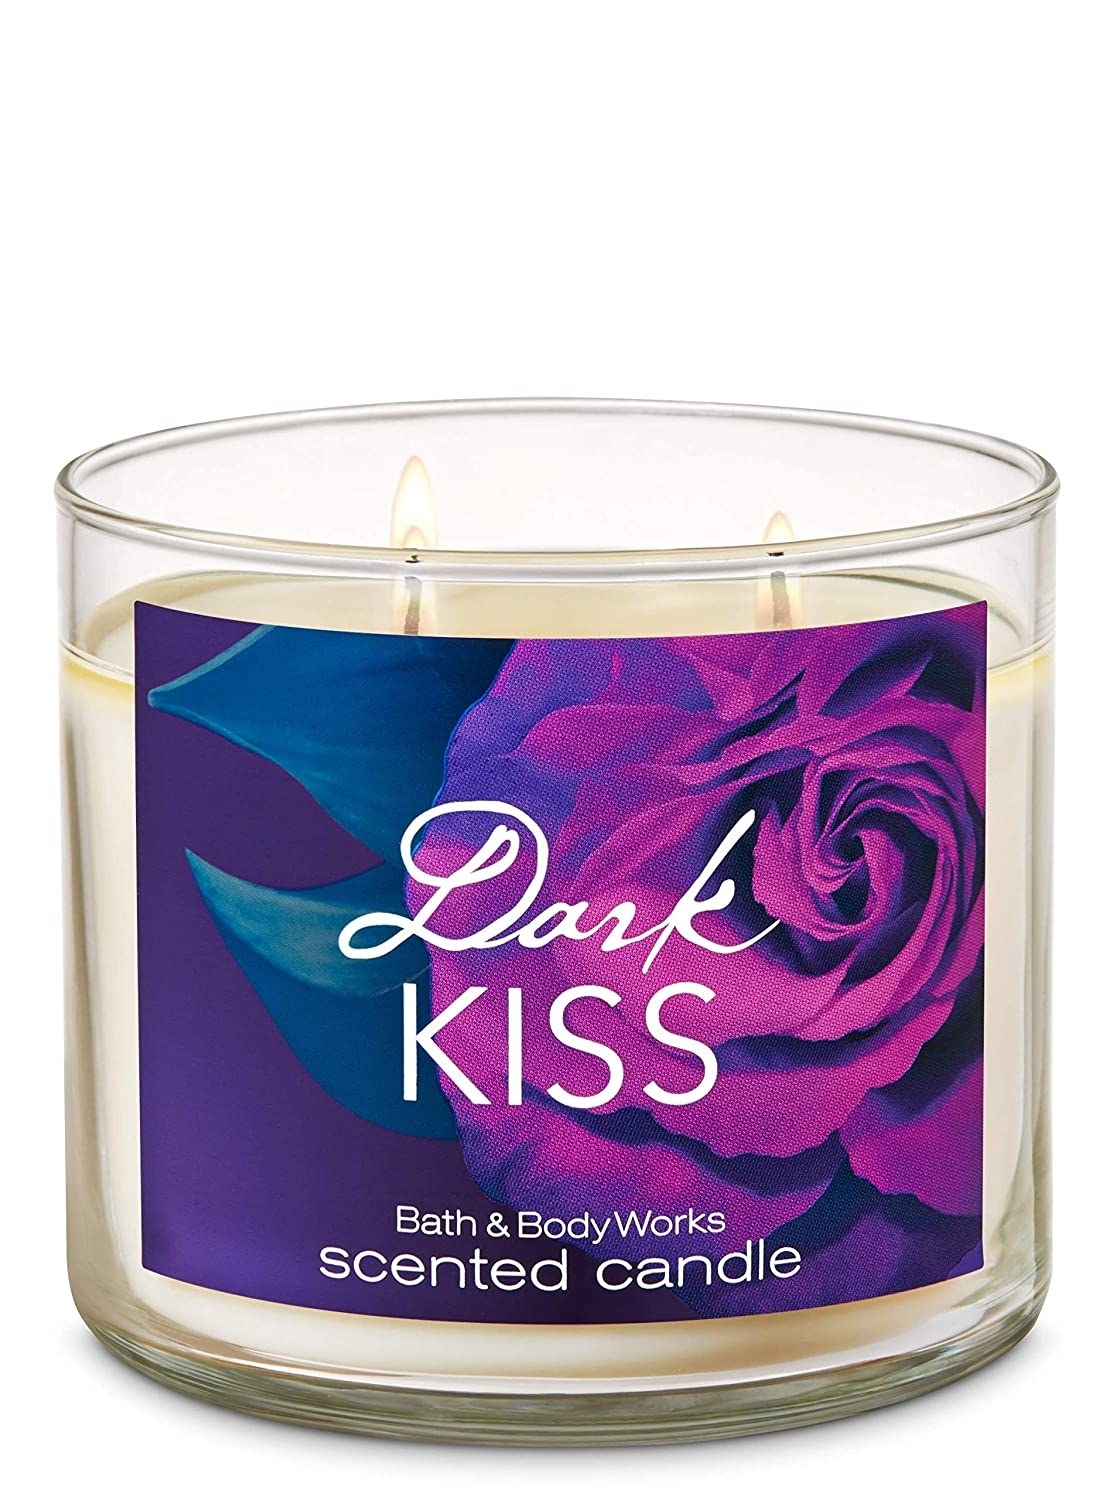 3 wick candle in the fragrance Dark Kiss